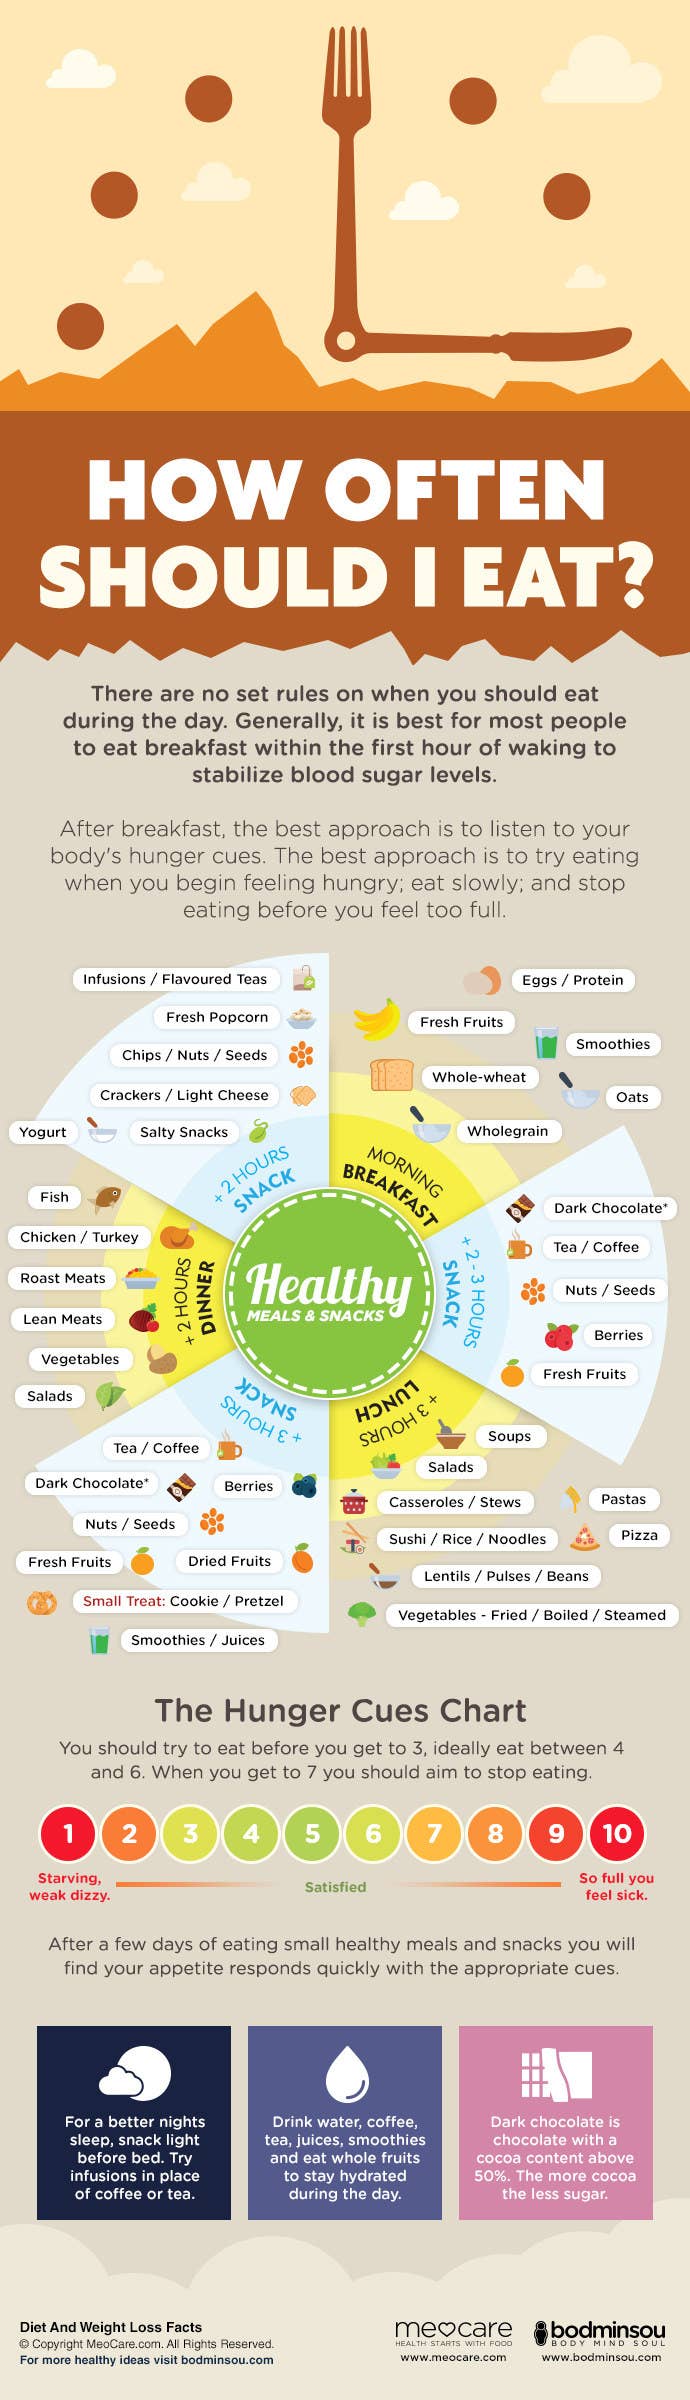 Of course everyone's appetite is different, but these suggestions can be so helpful for anyone who's trying to put some more thought and planning into the way they eat throughout the day.